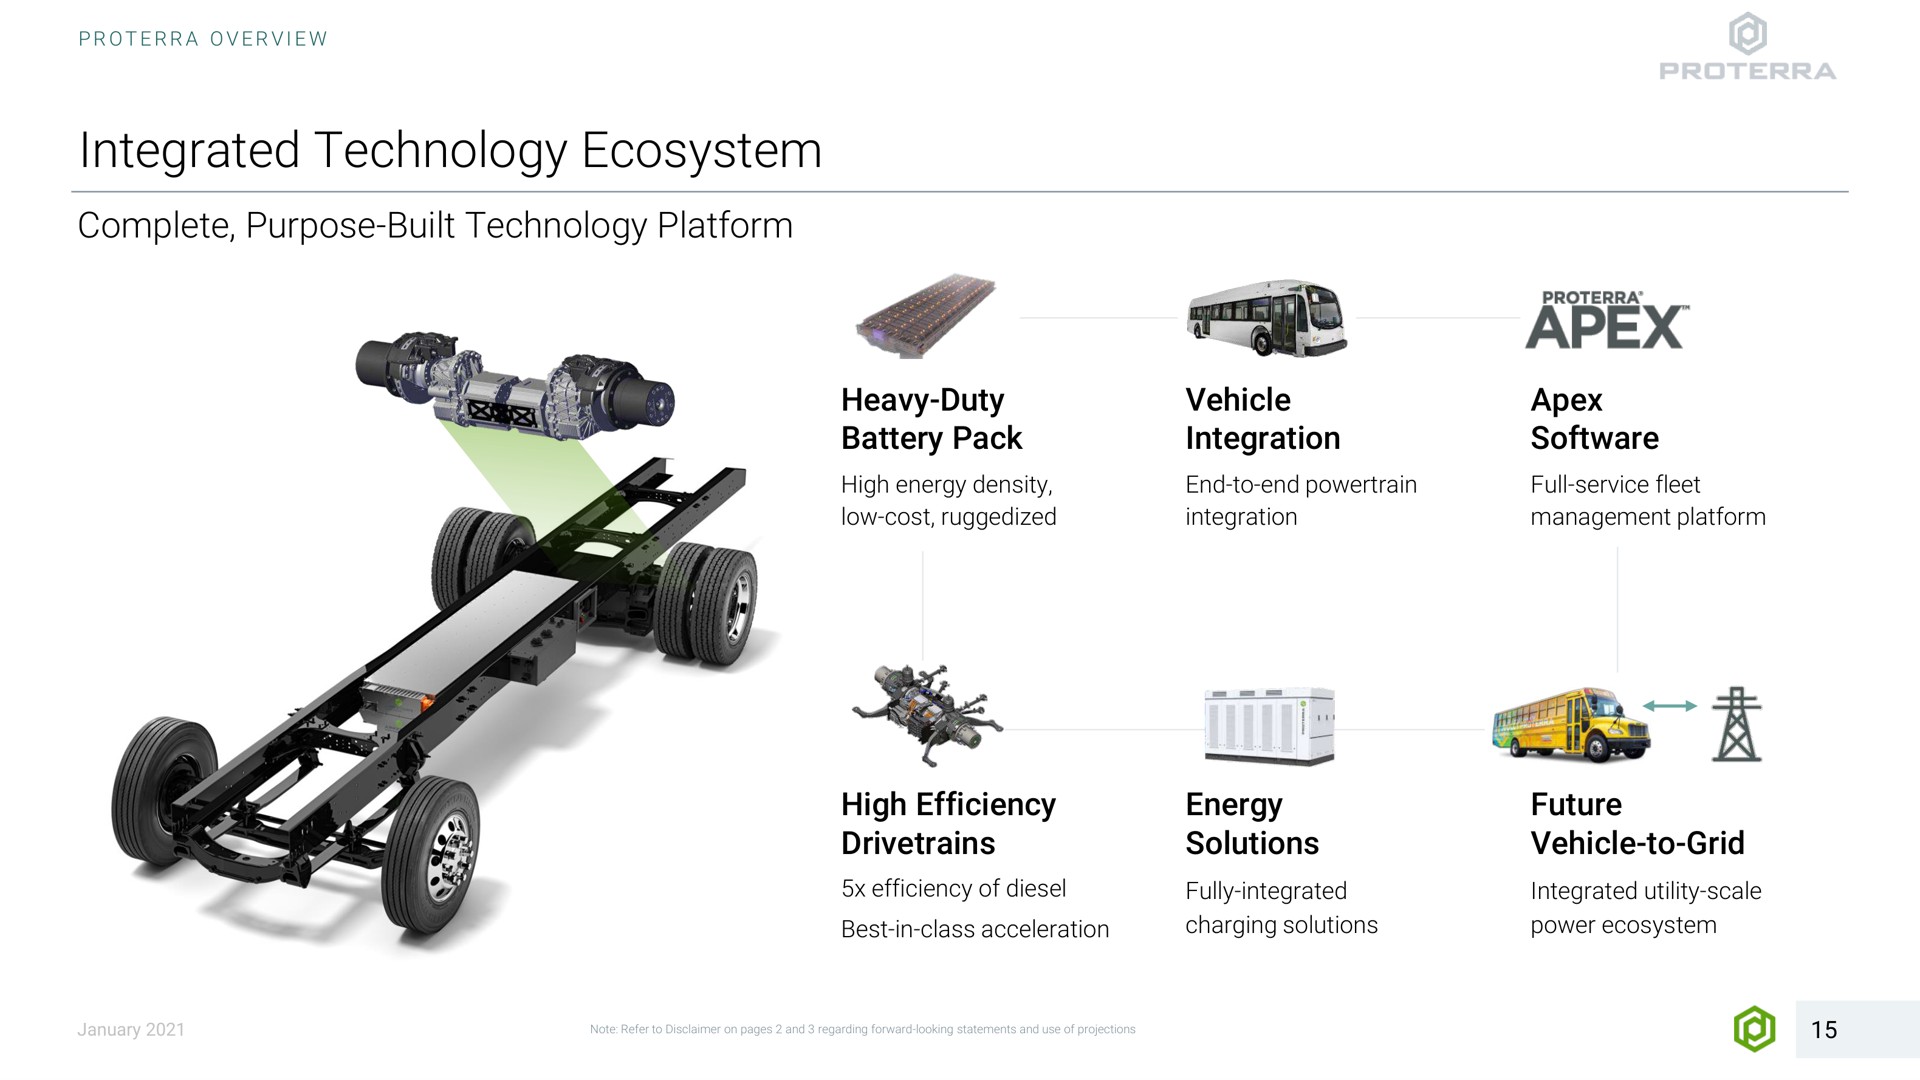 integrated technology ecosystem complete purpose built platform vehicle integration apex end to end integration full service fleet management platform heavy duty battery pack high energy density low cost efficiency of diesel best in class acceleration high efficiency energy solutions fully integrated charging solutions future vehicle to grid utility scale power is | Proterra